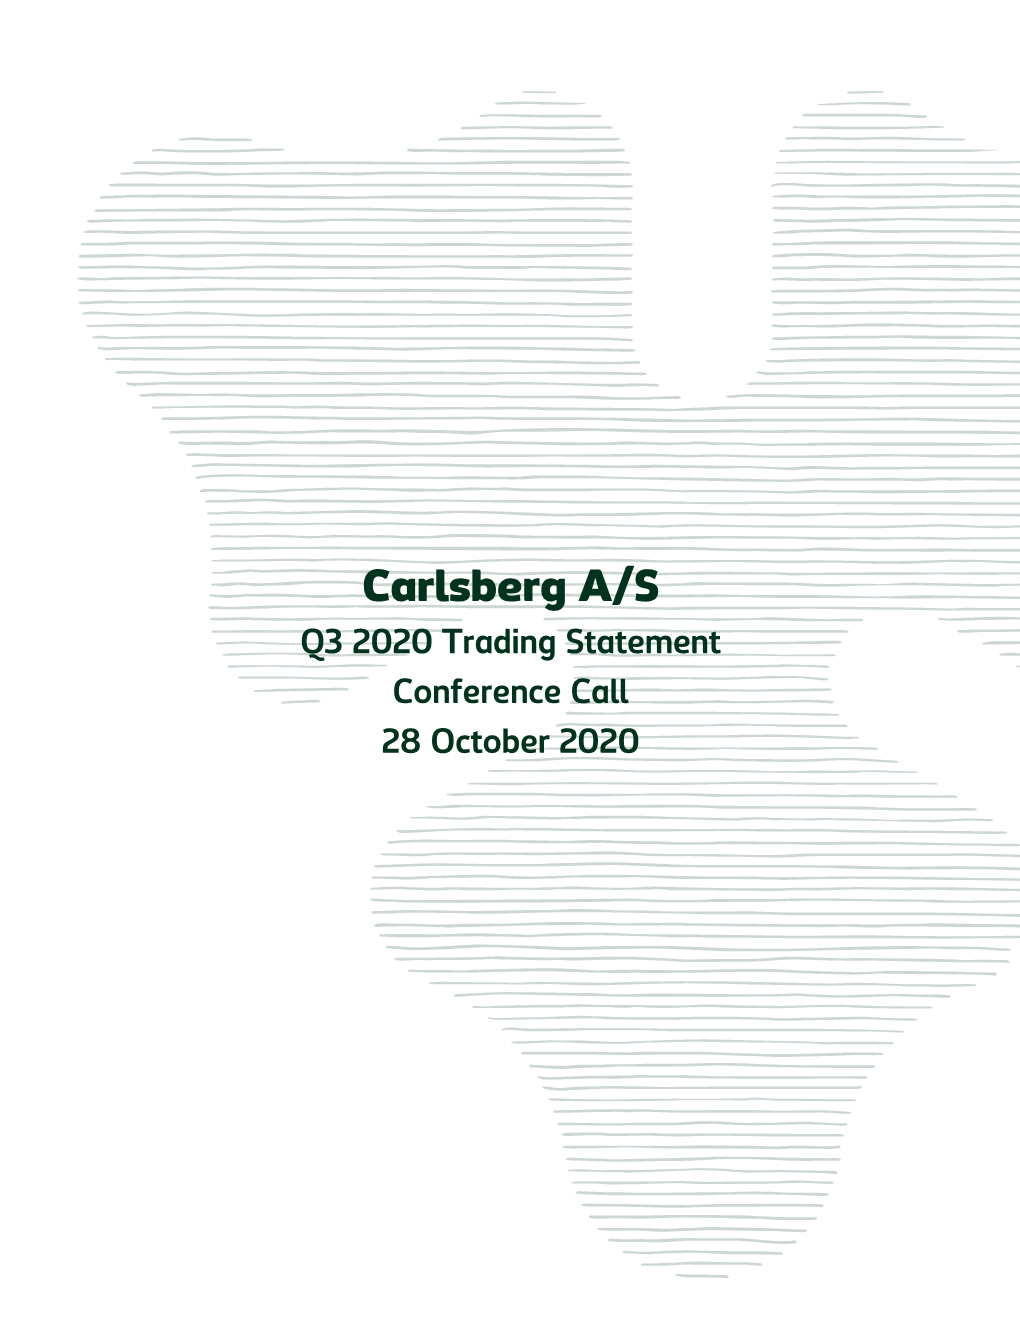 Carlsberg A/S Q3 2020 Trading Statement Conference Call